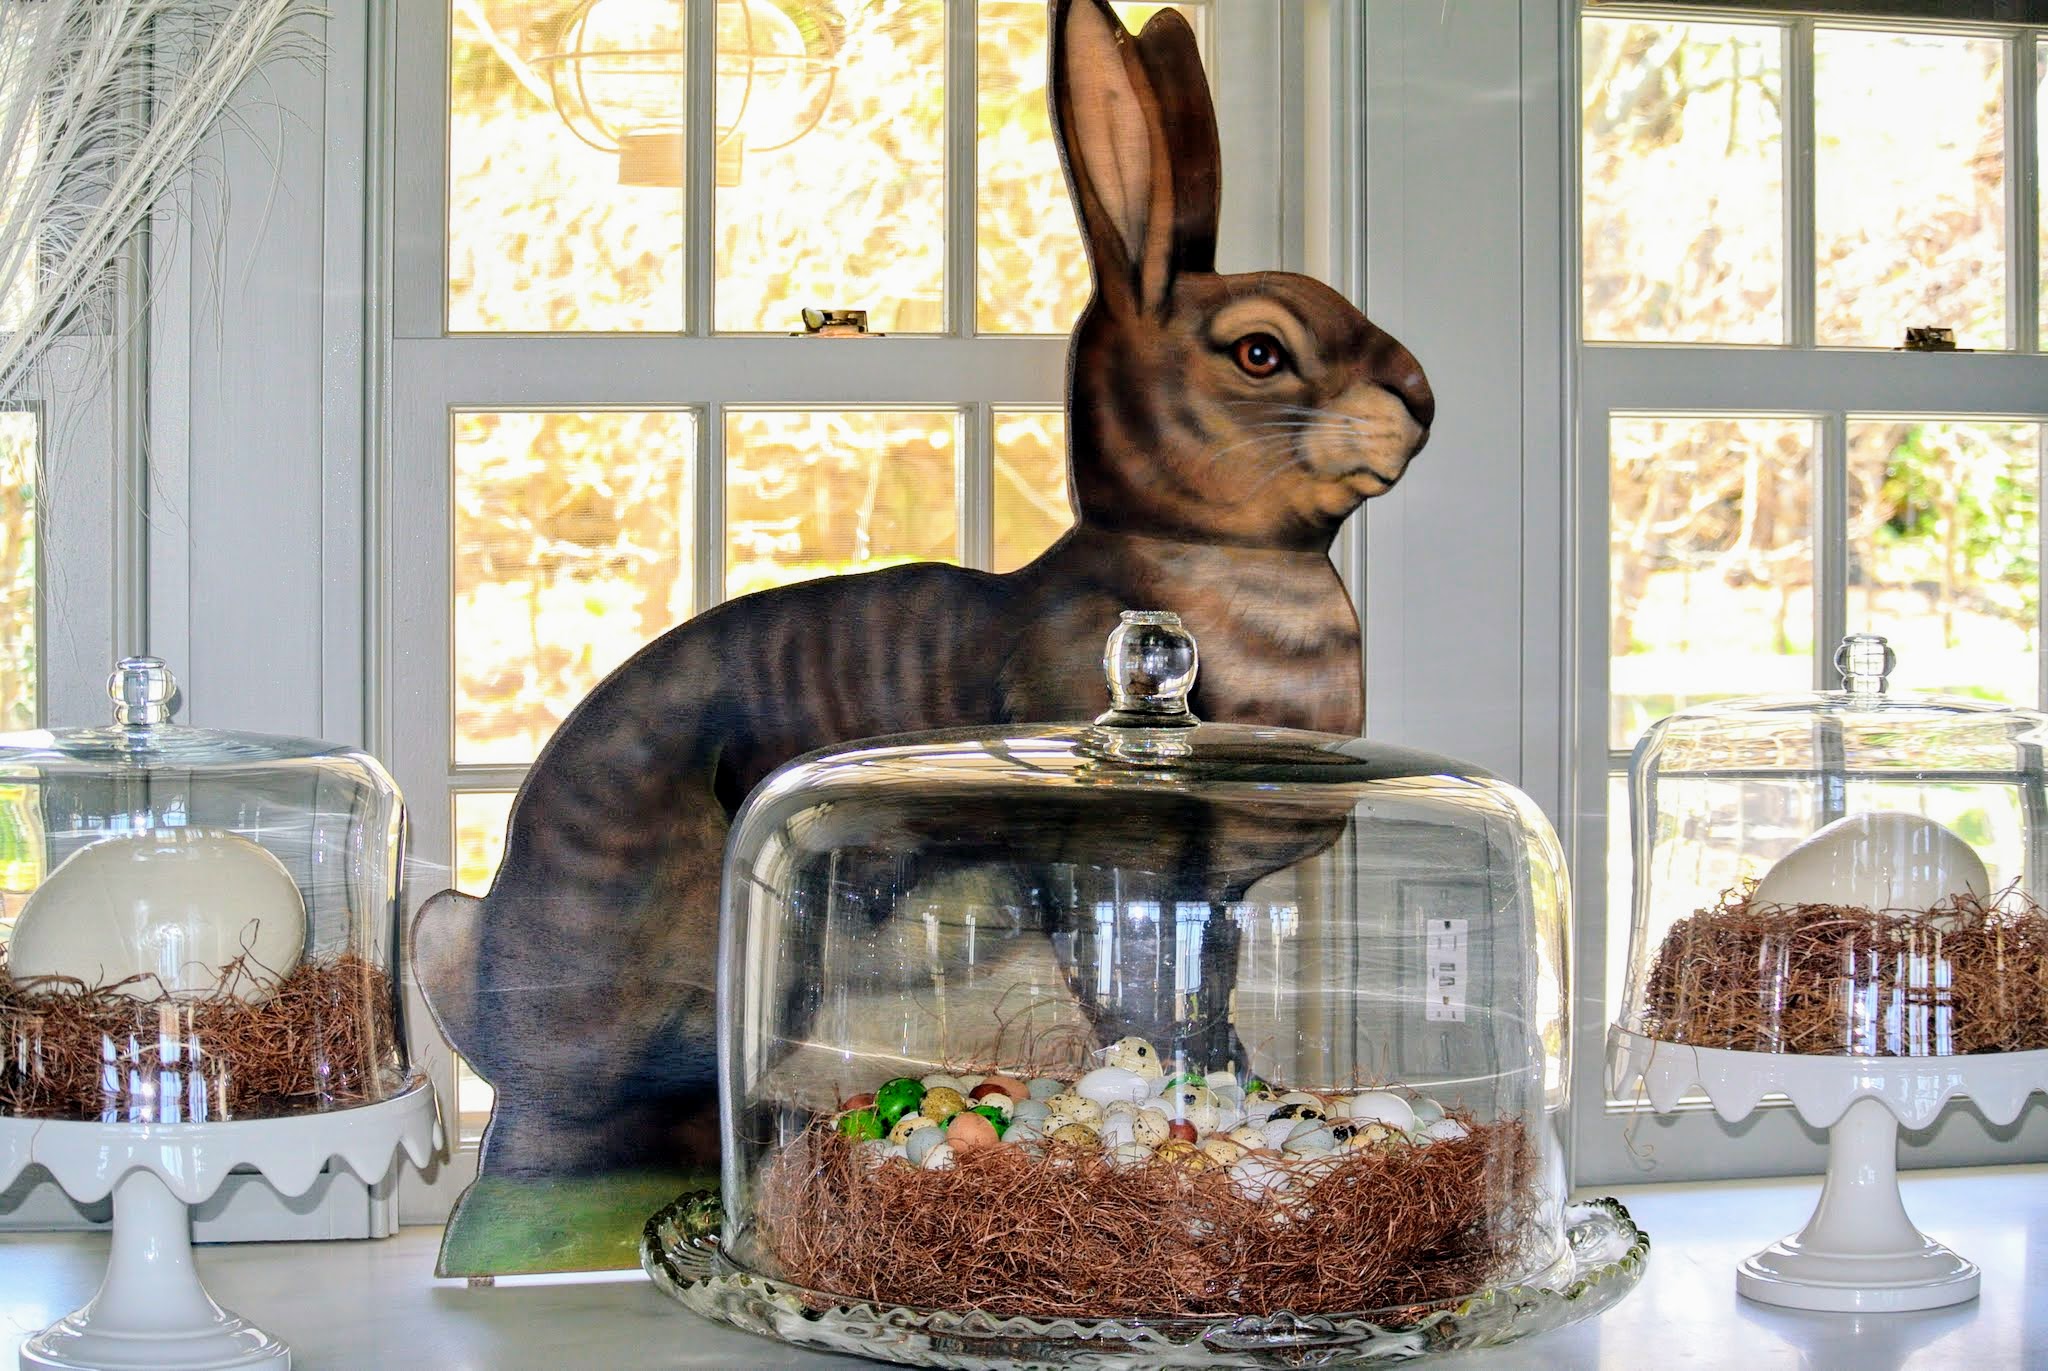 Martha Stewart Collection's Best Easter Decorations